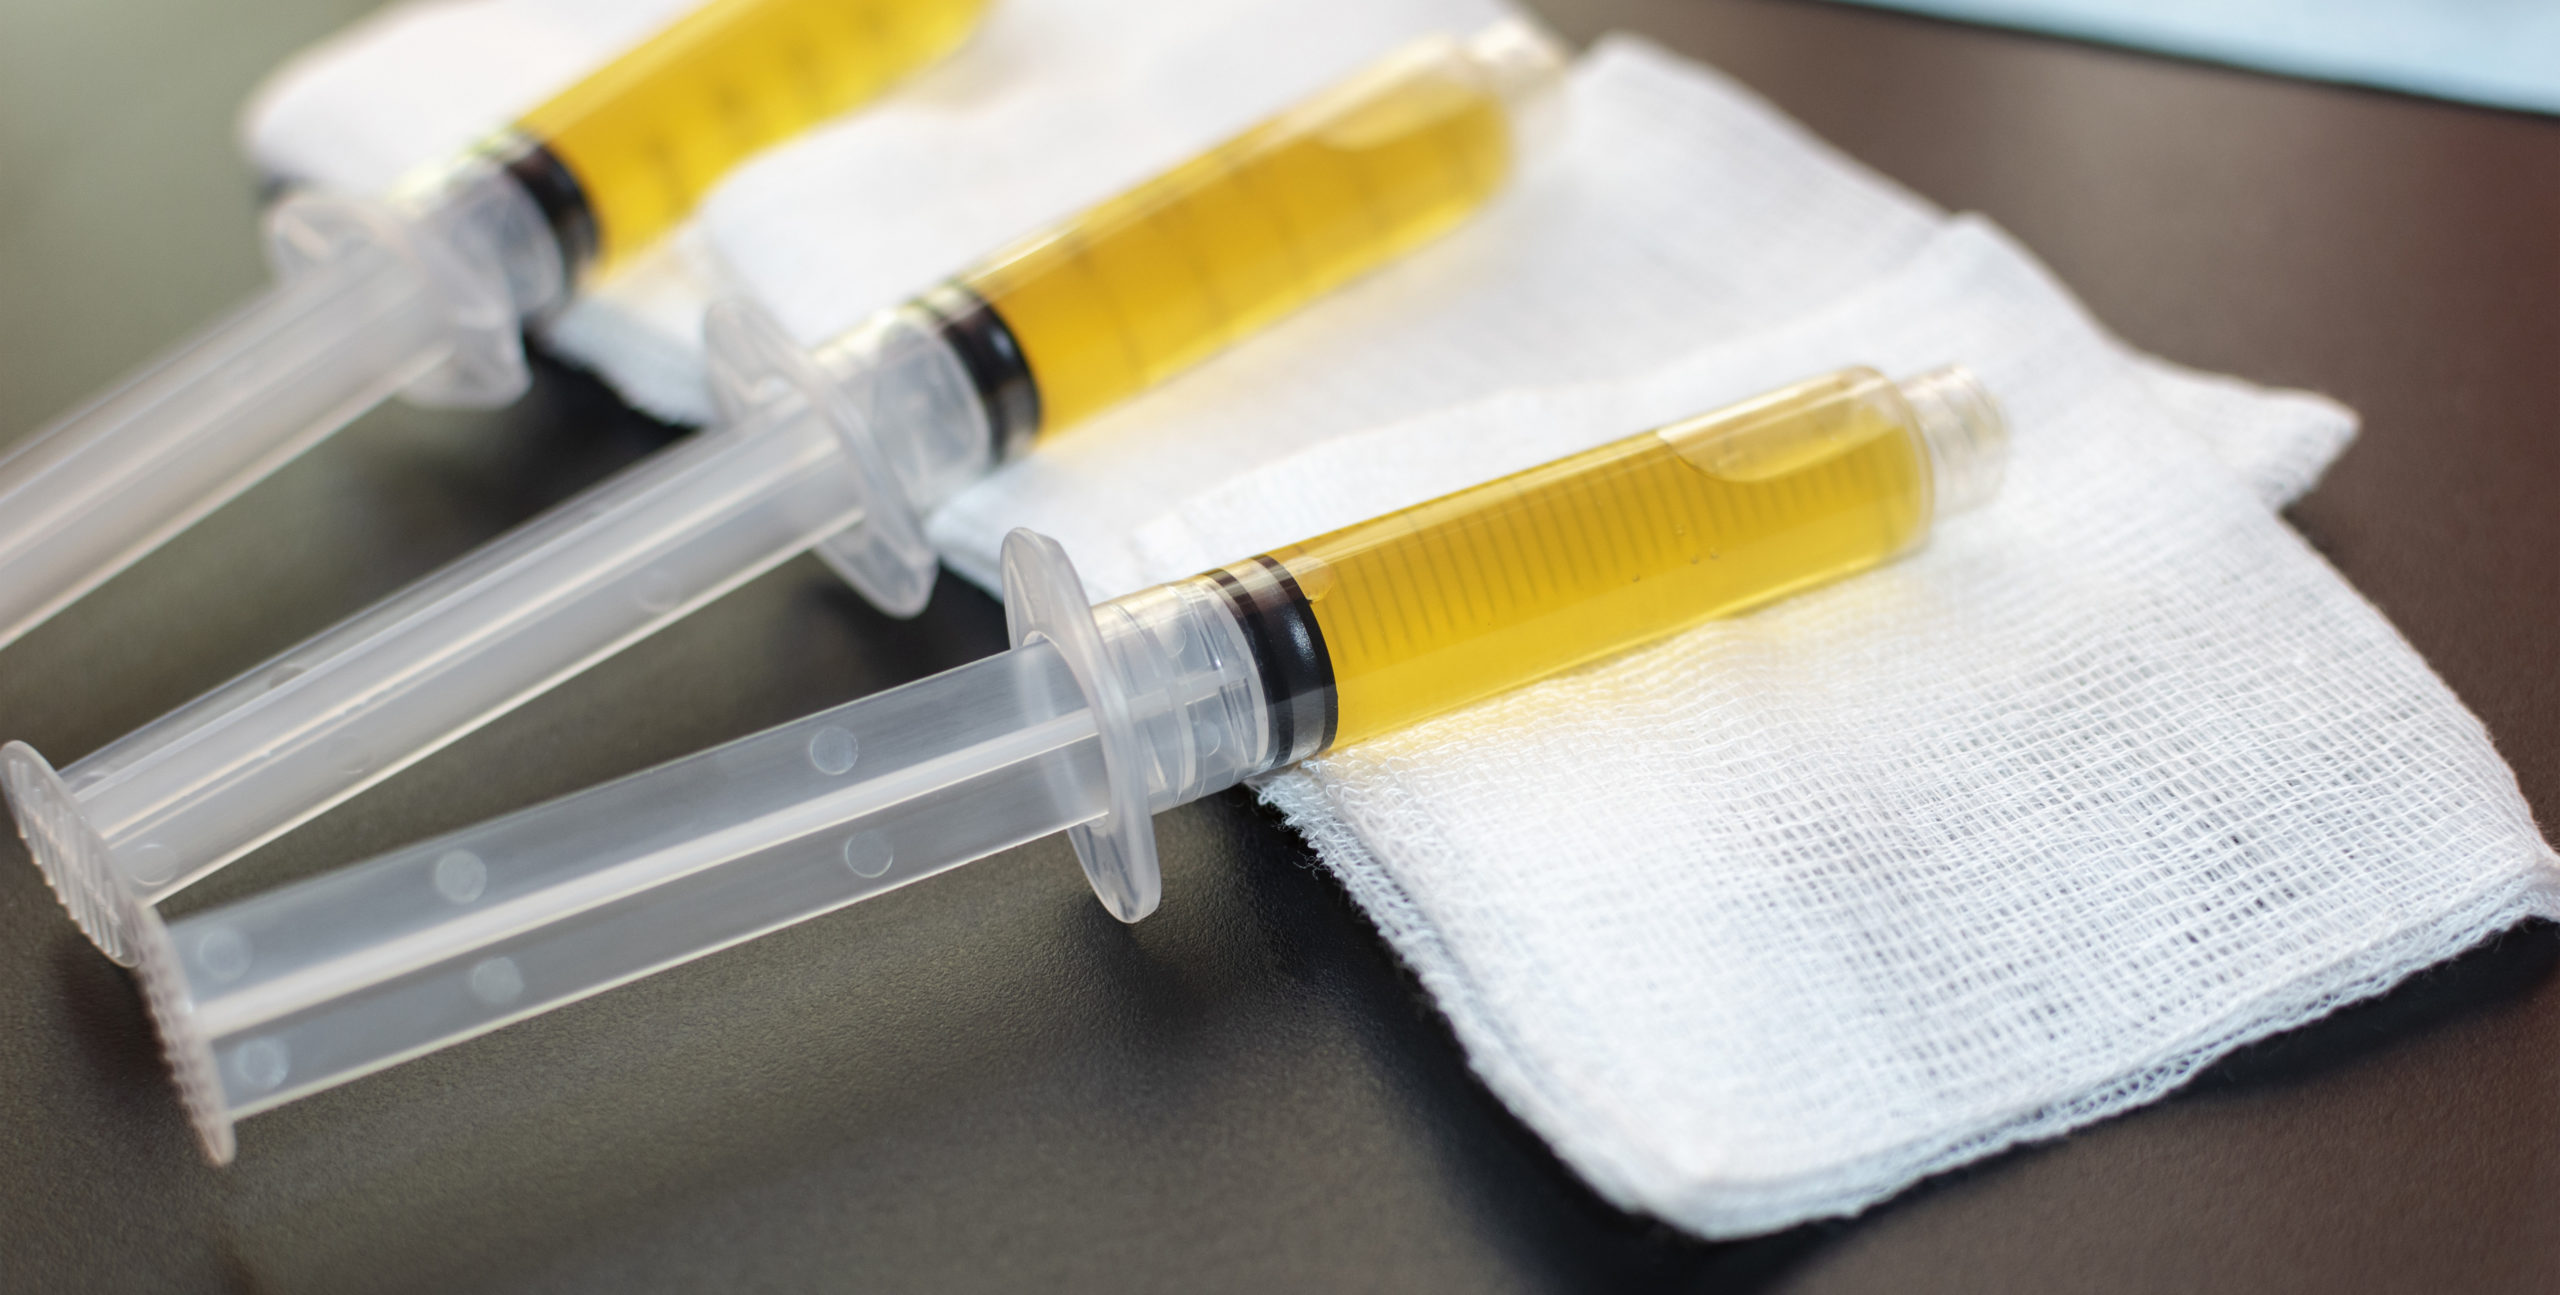 PLATELET-RICH PLASMA (PRP) INJECTION: HOW IT WORKS